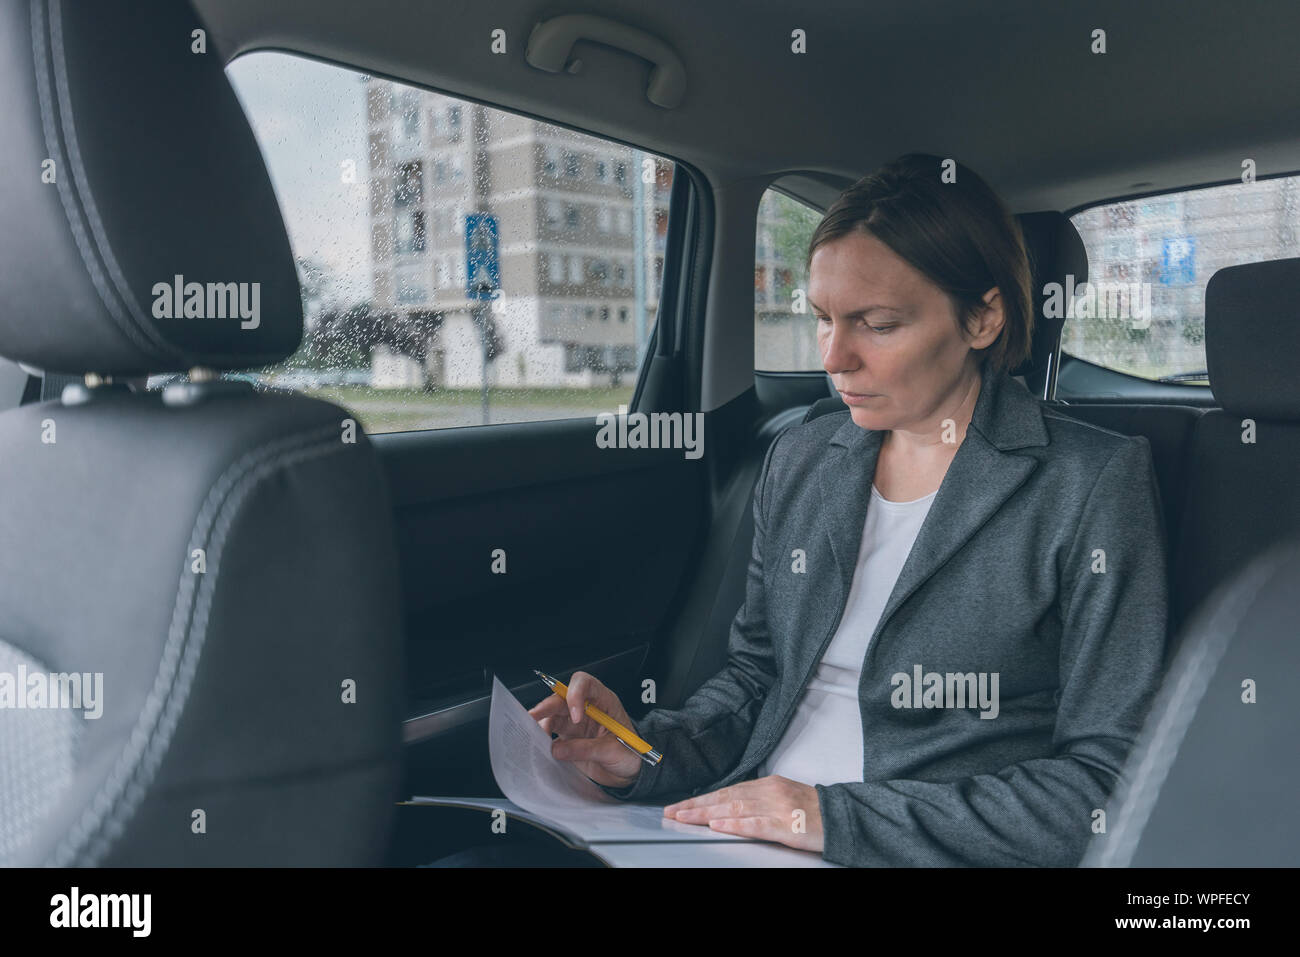 Businesswoman doing business paperwork on car back seat, adult caucasian female businessperson executive analyzing business results while traveling by Stock Photo